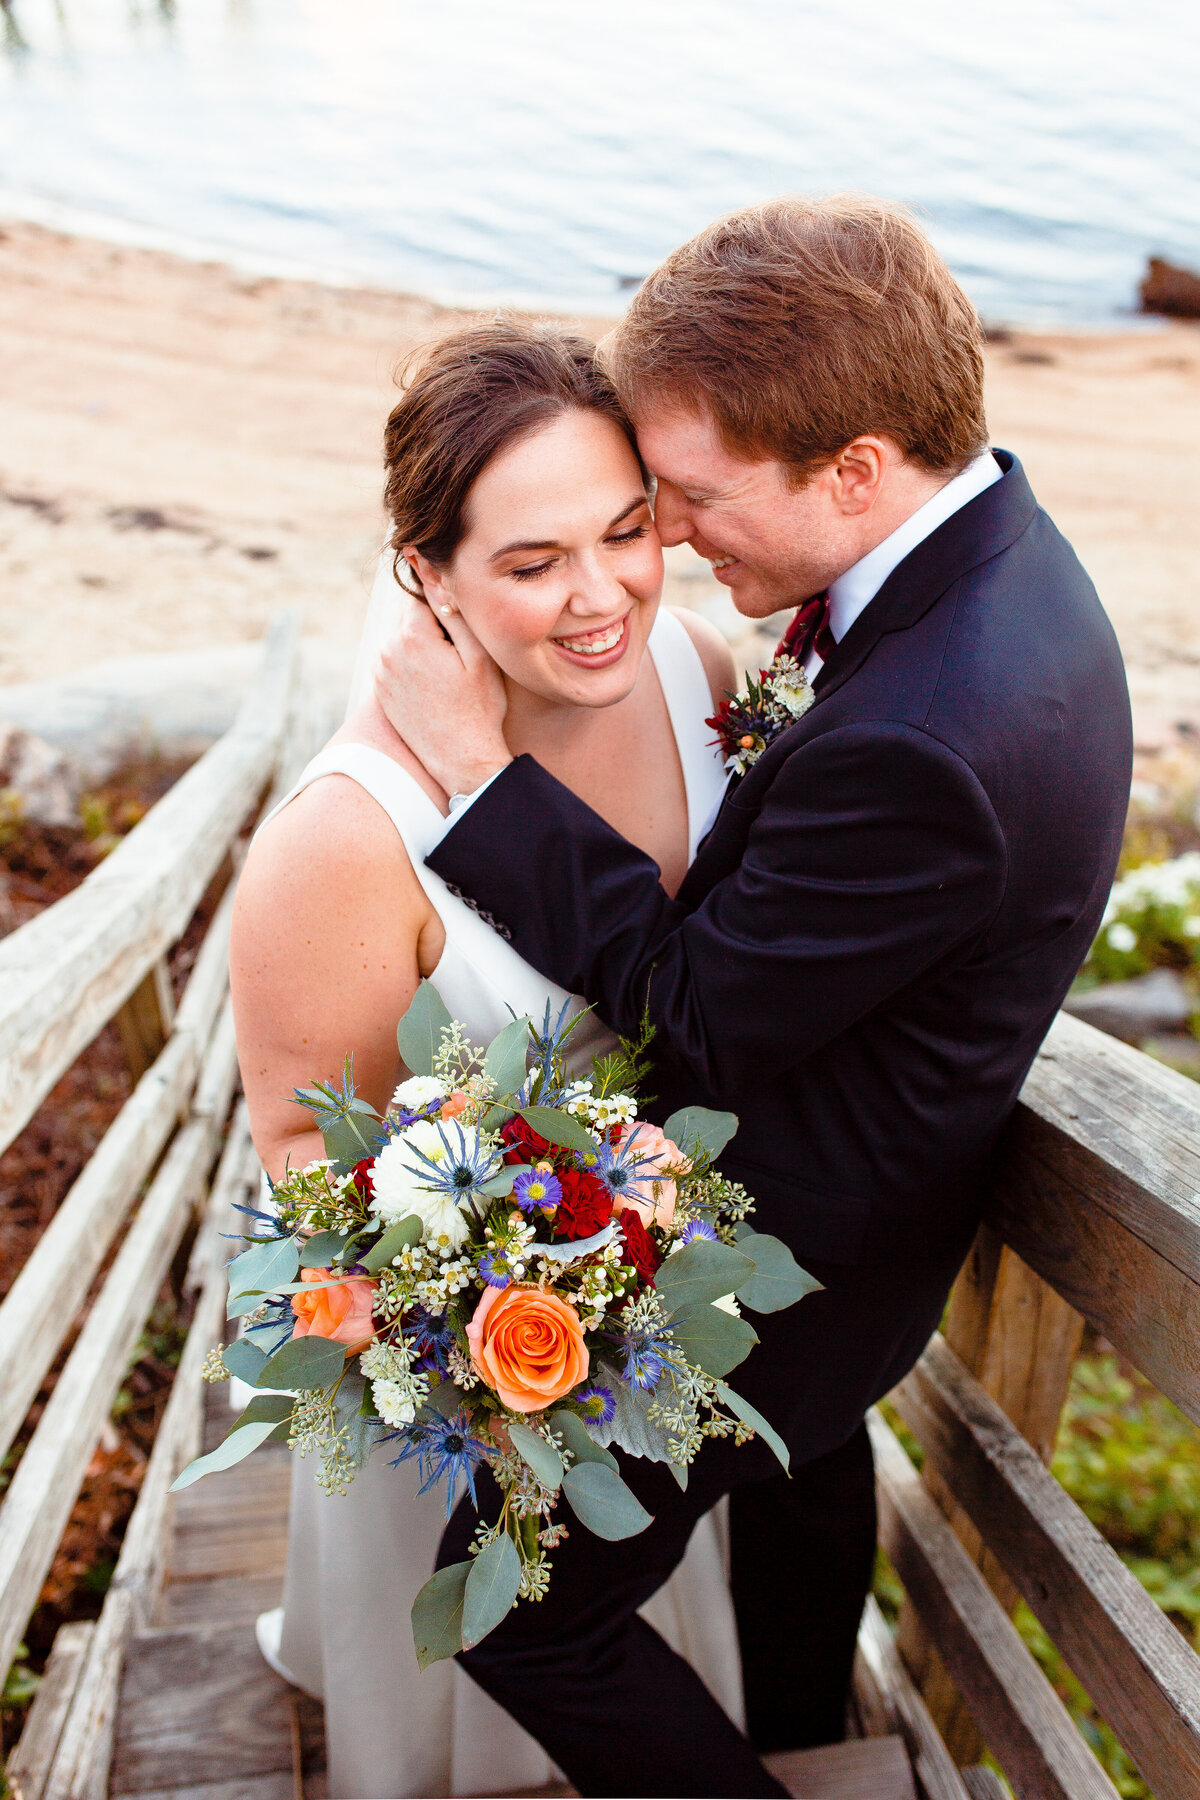 Newlyweds snuggle and laugh on the beach in Noank, CT.